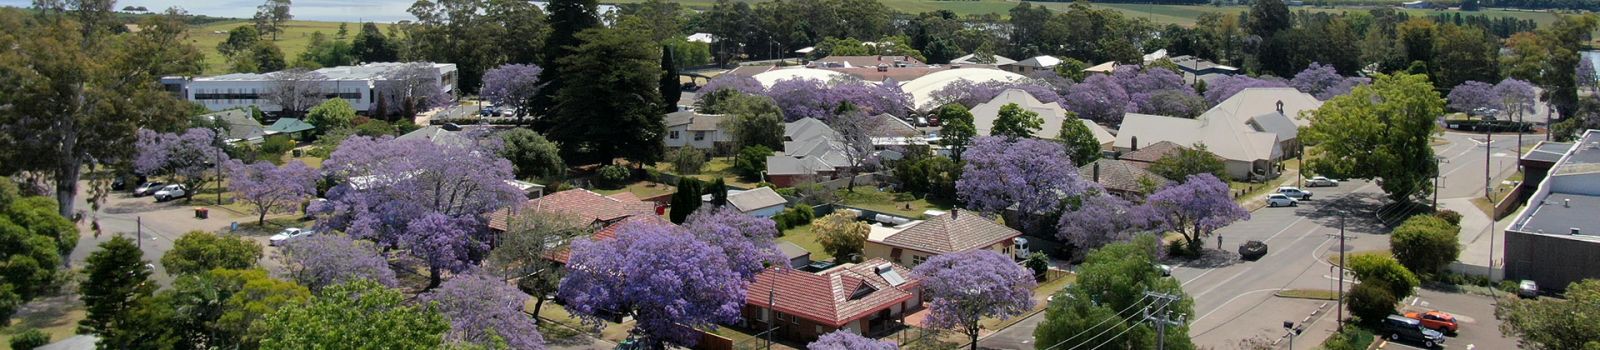 Aerial view looking over rooftops in Raymond Terrace with the purple jacaranda trees flowering banner image